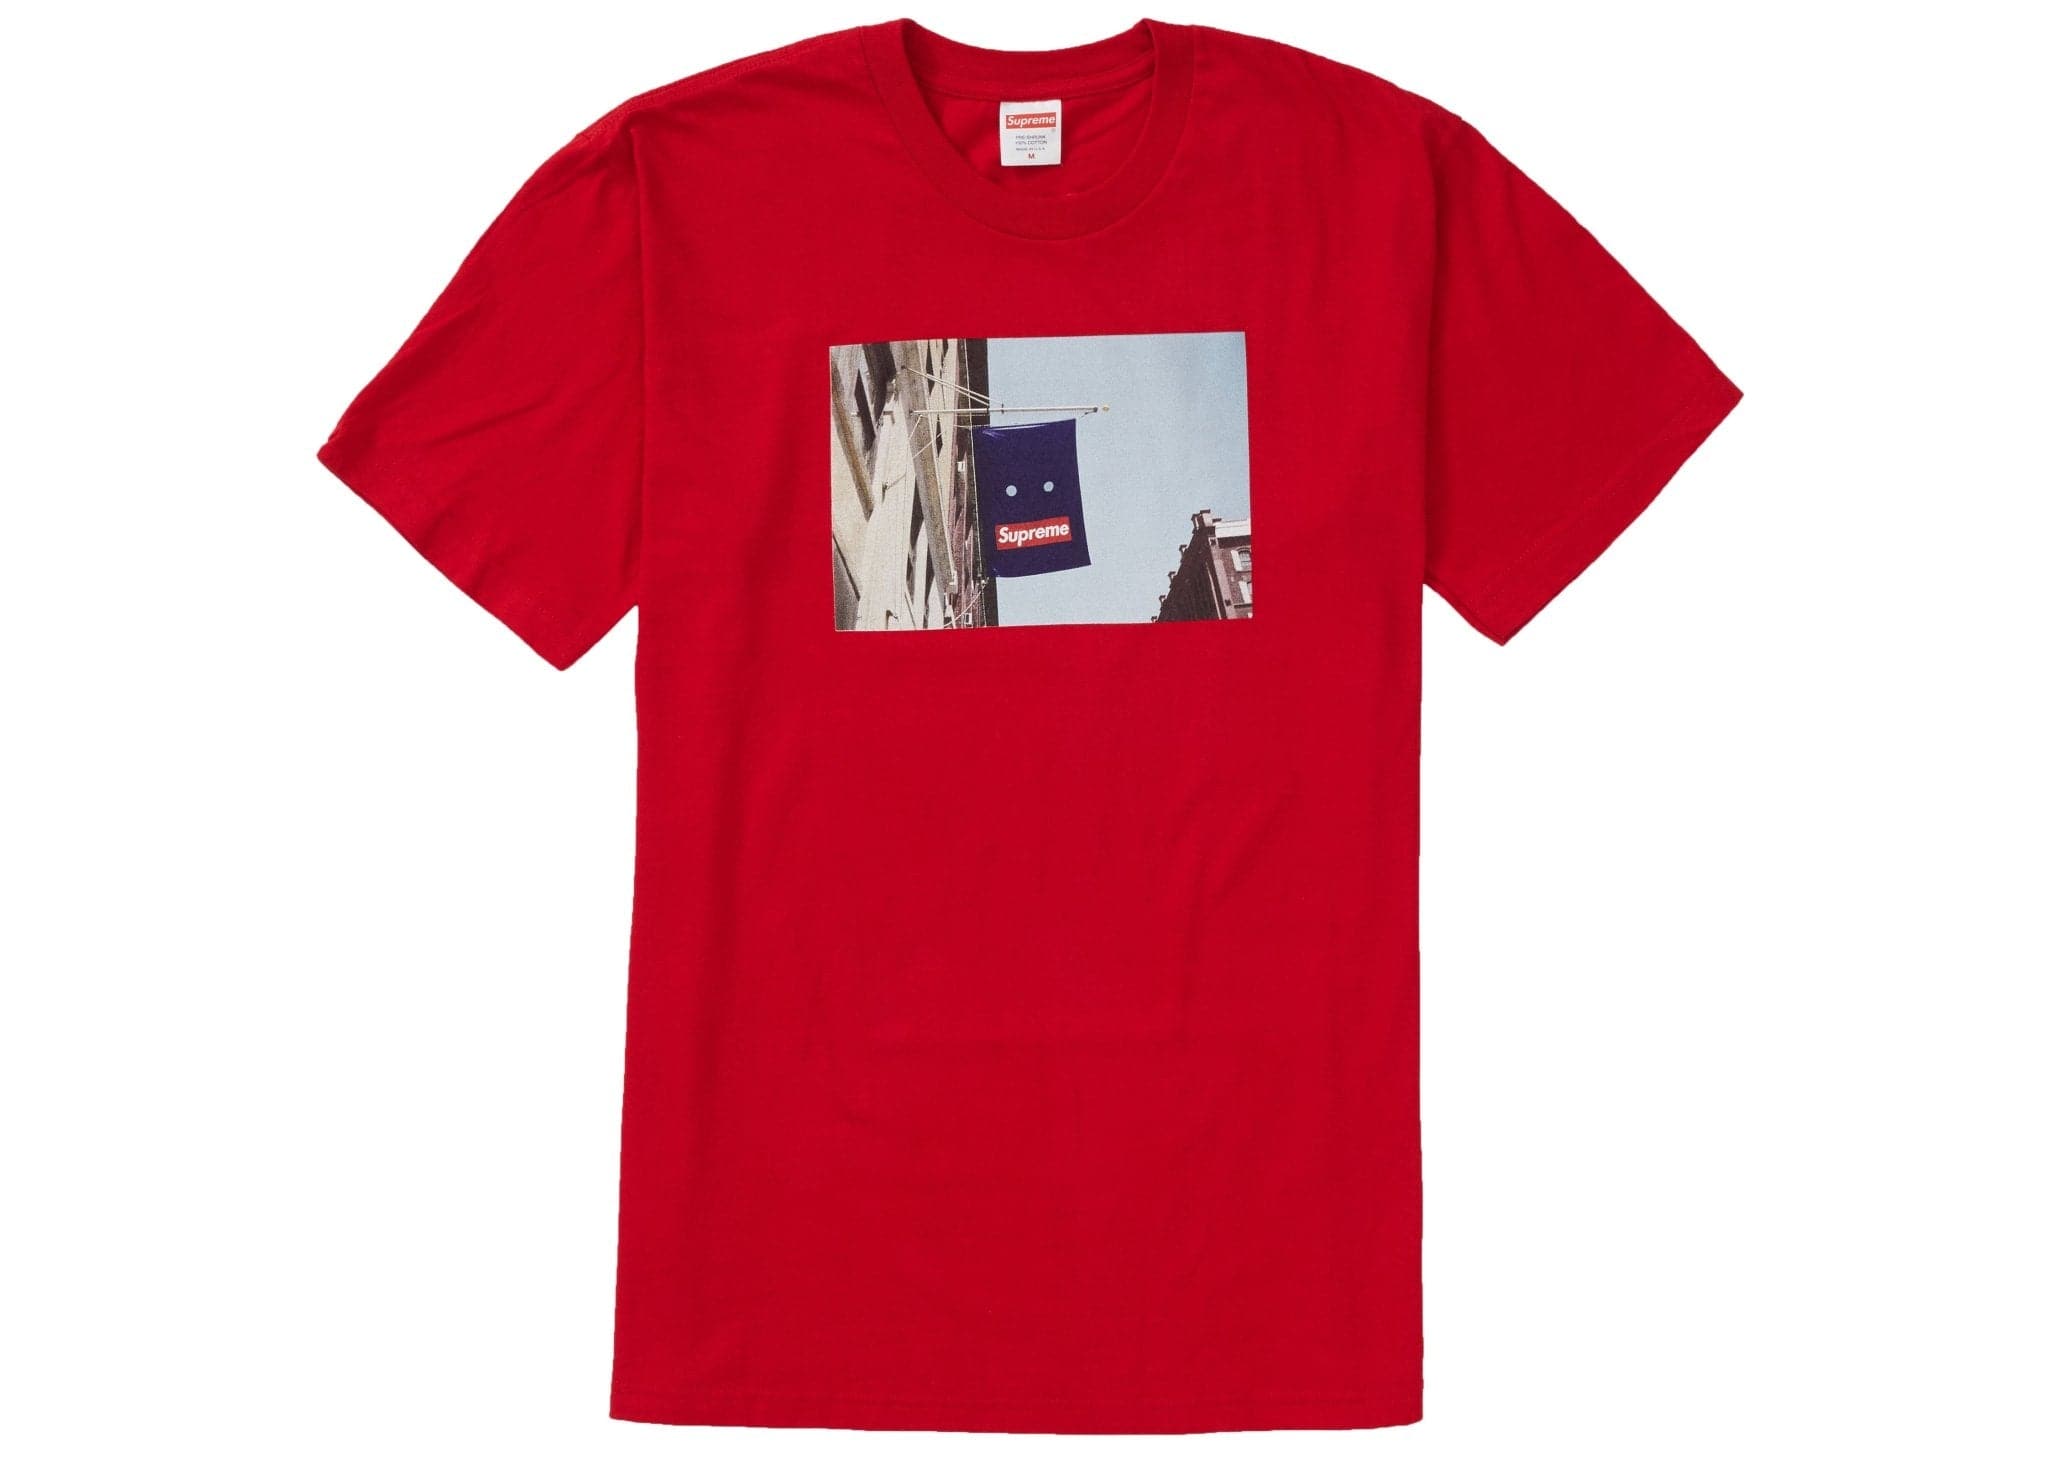 SUPREME BANNER TEE - RED - The Magnolia Park